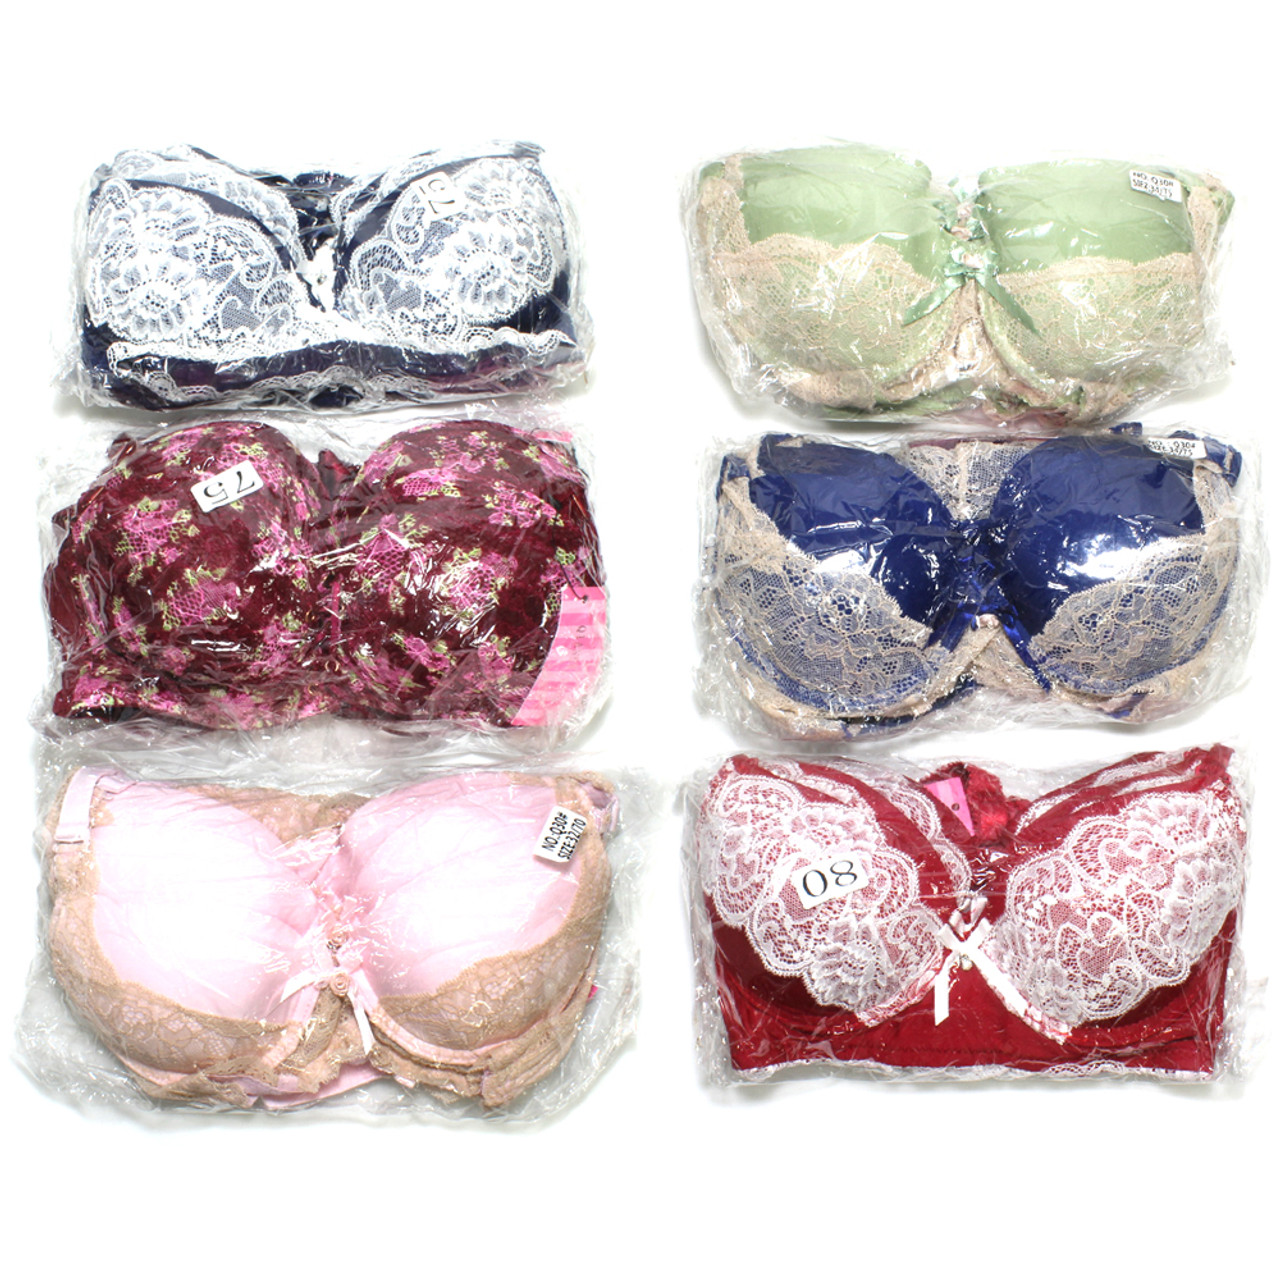 Wholesale ladies bra importers For Supportive Underwear 